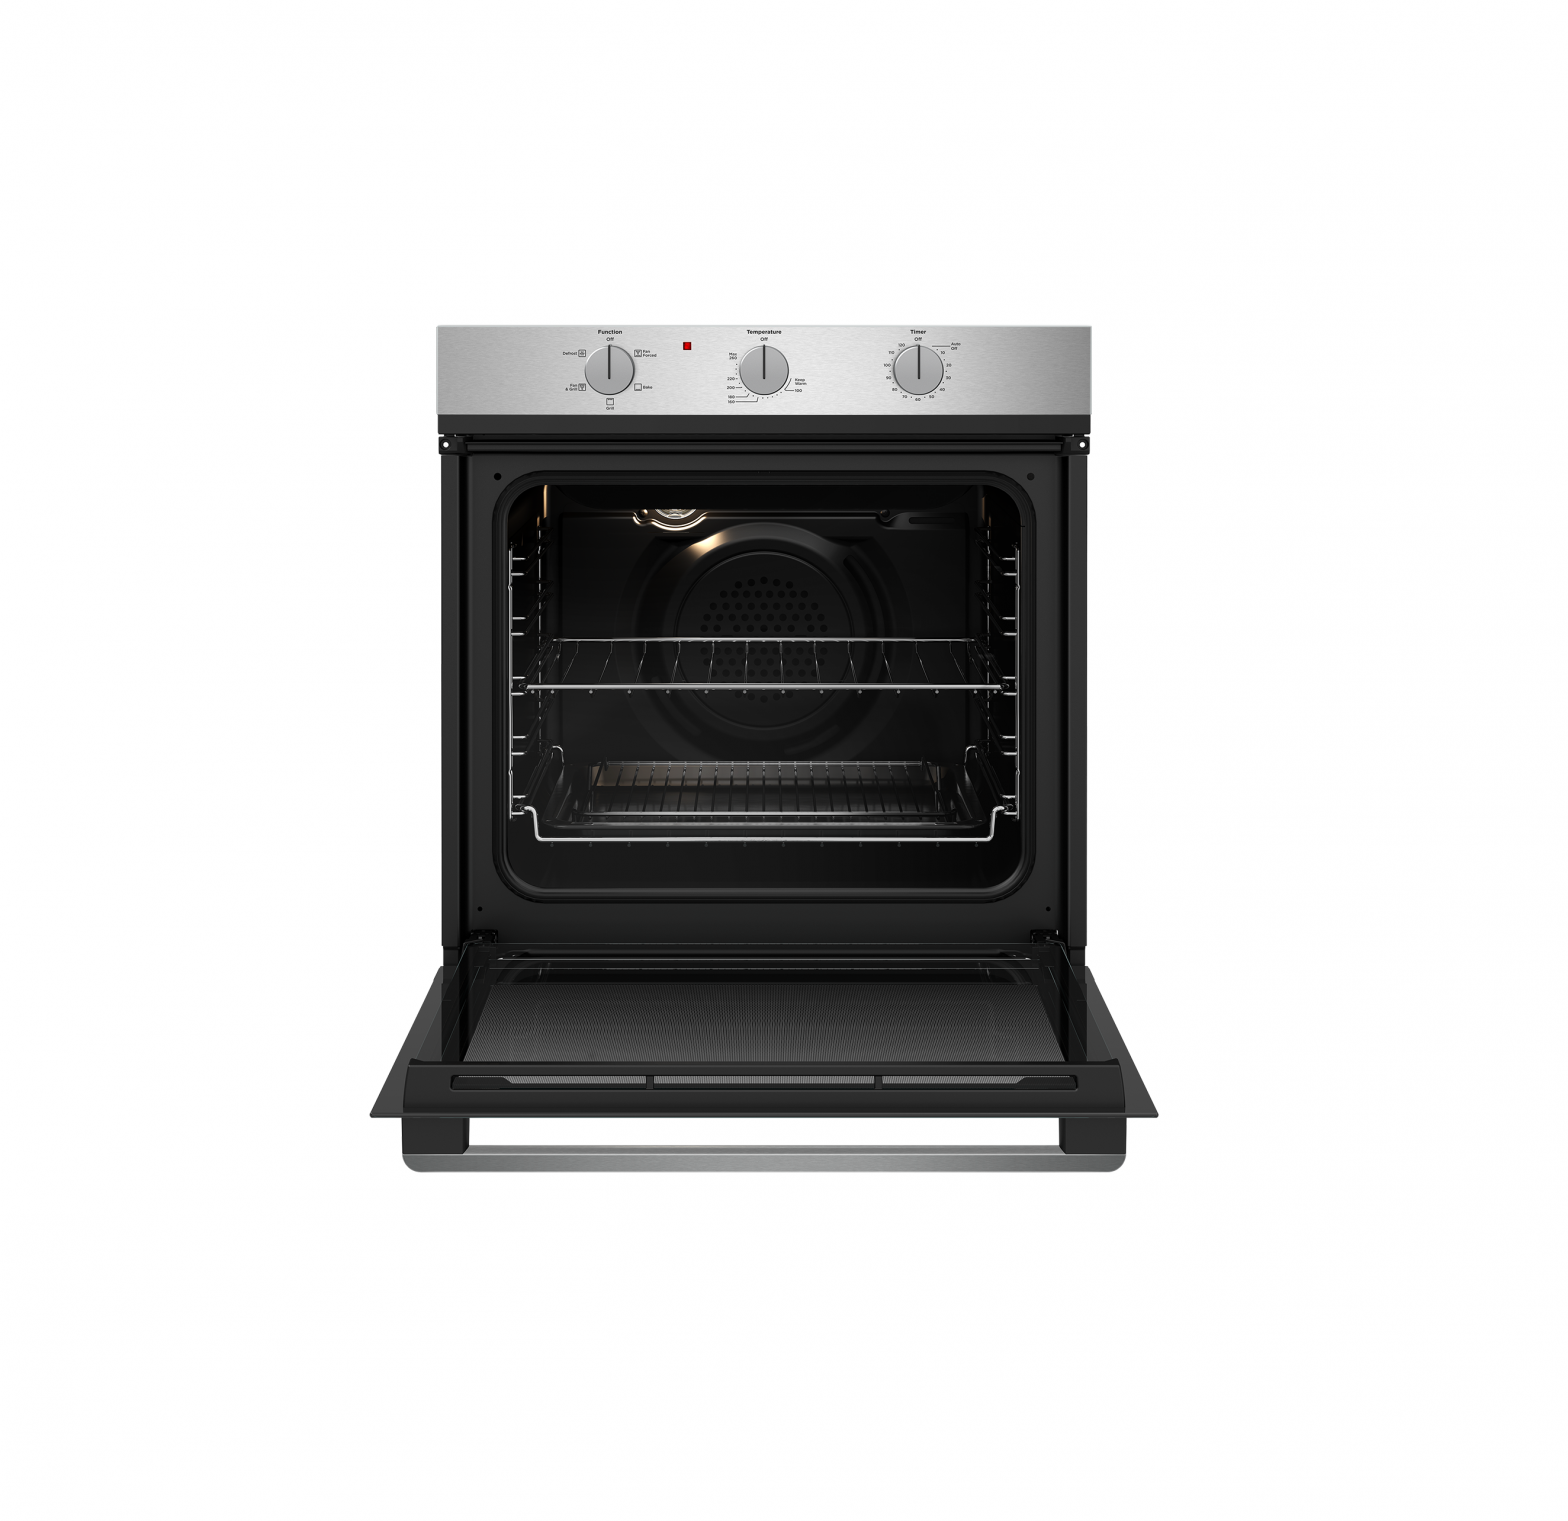 westinghouse WVG613 oven series User Guide